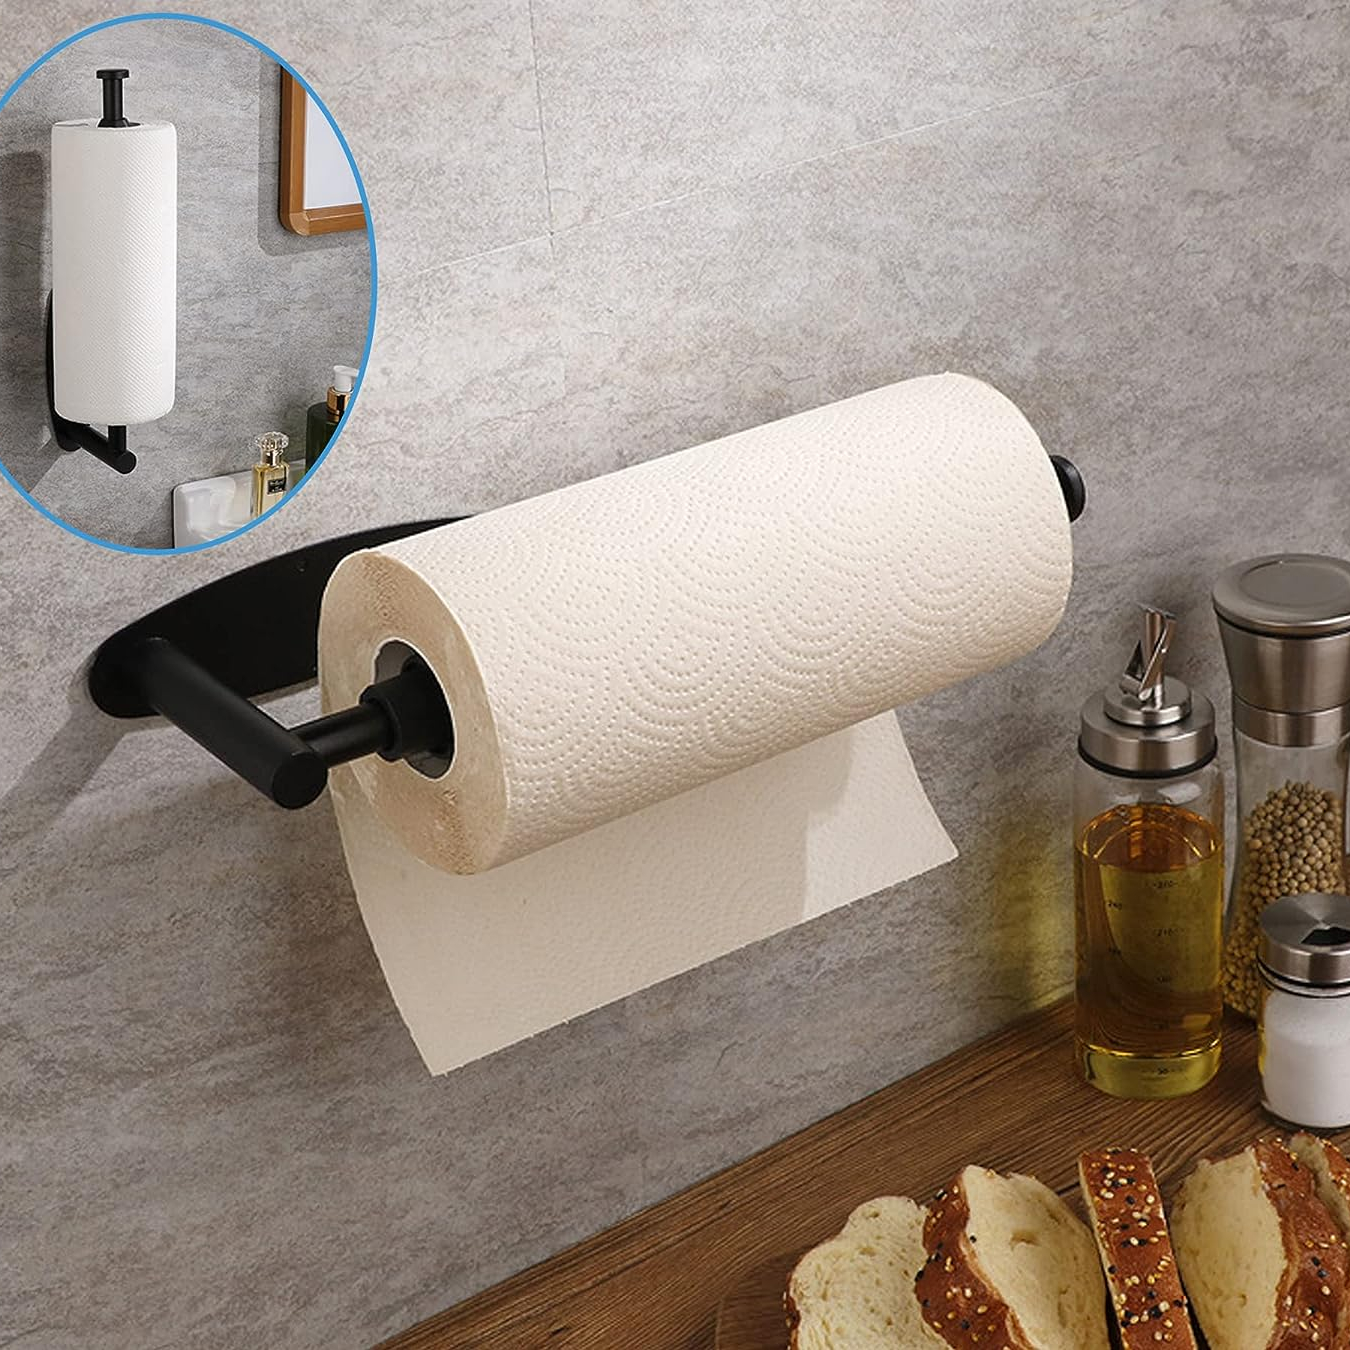 Stainless Steel Paper Towel Holder, Wall Mount for Kitchen, Bathroom, RV,  Paper Towel Rack with Self Adhesive and Screws